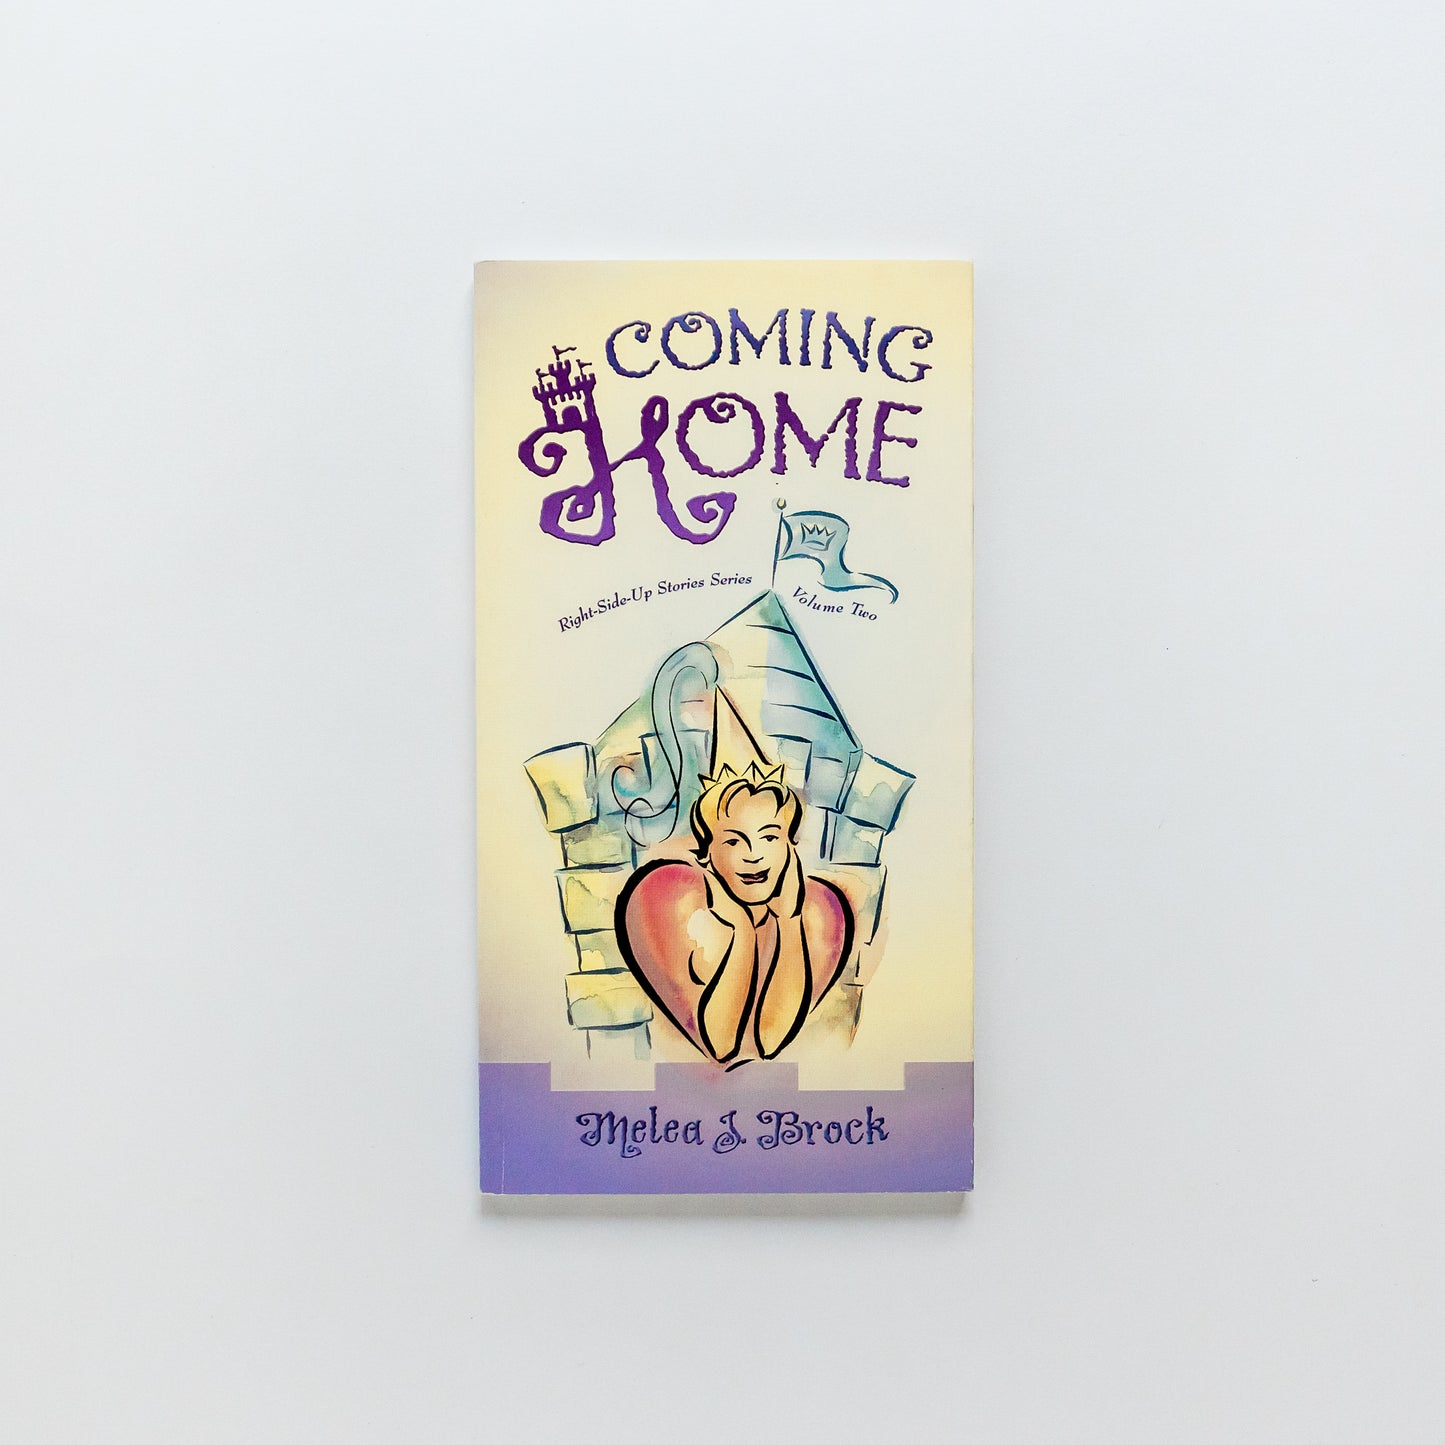 “Coming Home”